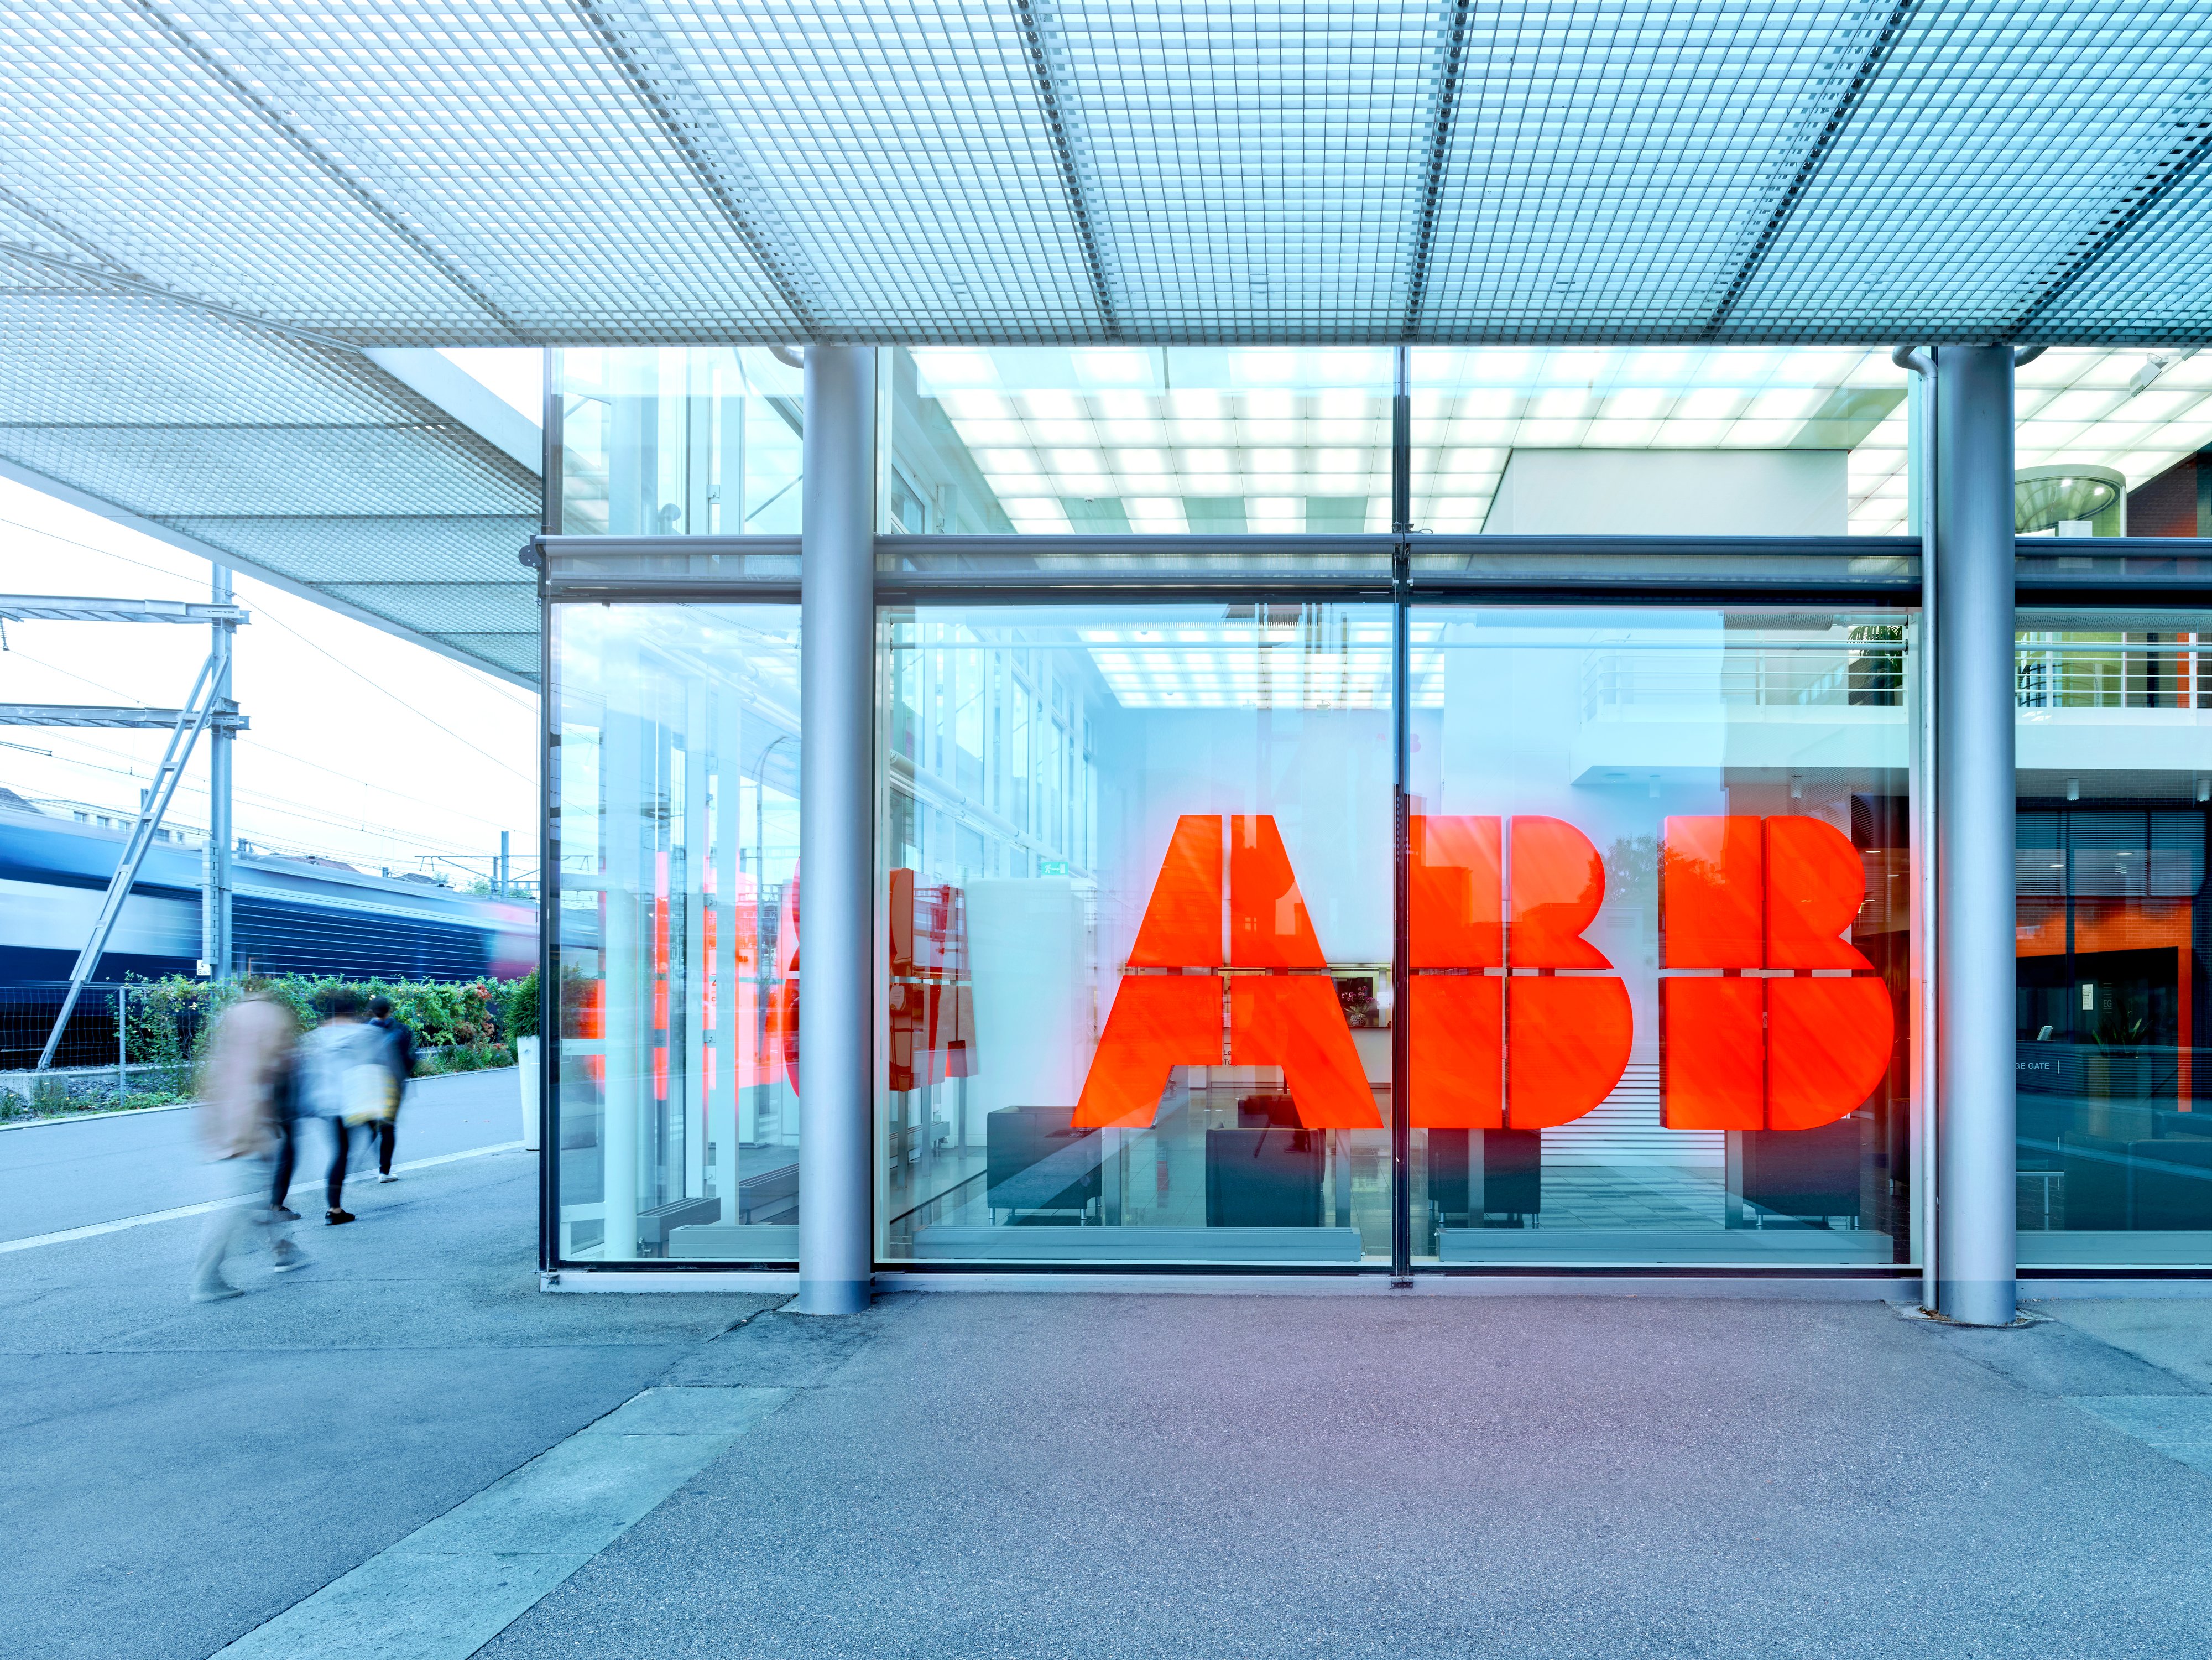 ABB’s commitment to a comprehensive testing approach